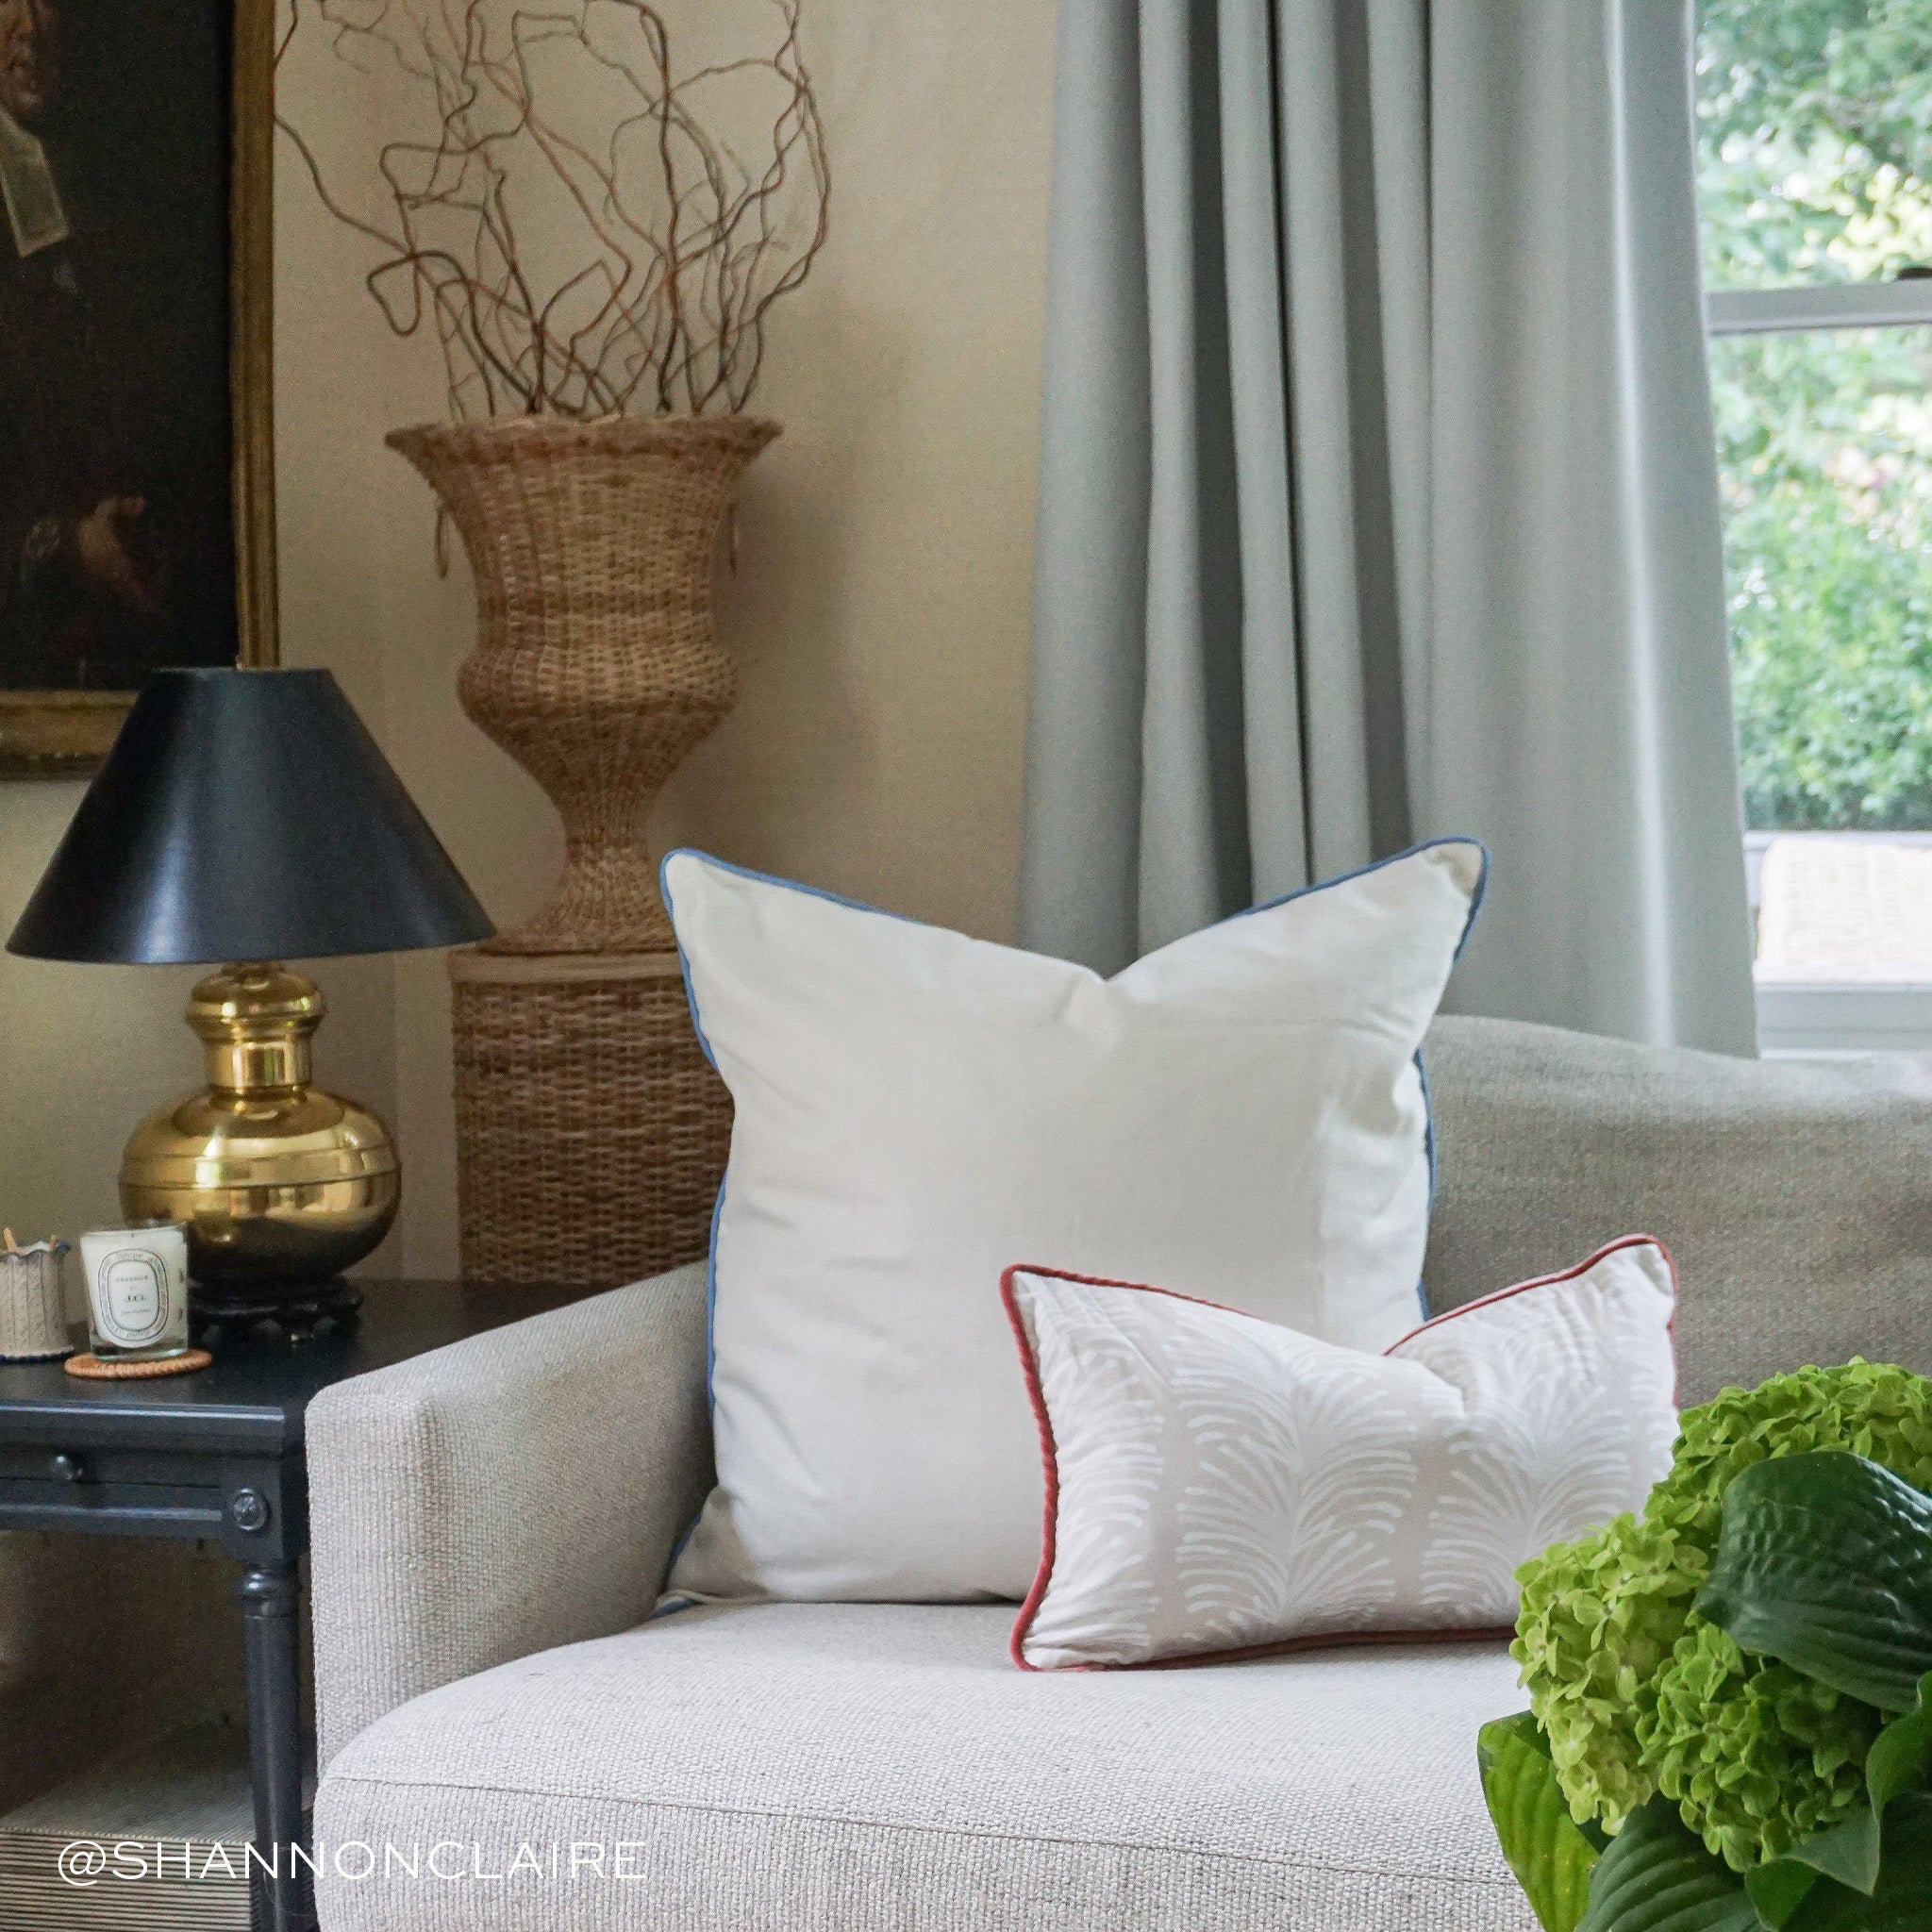 Living room corner styled with a Natural White Linen Pillow and Beige Botanical Stripe Printed Lumbar on couch by black table with gold and black lamp on it. Photo taken by Shannon Claire